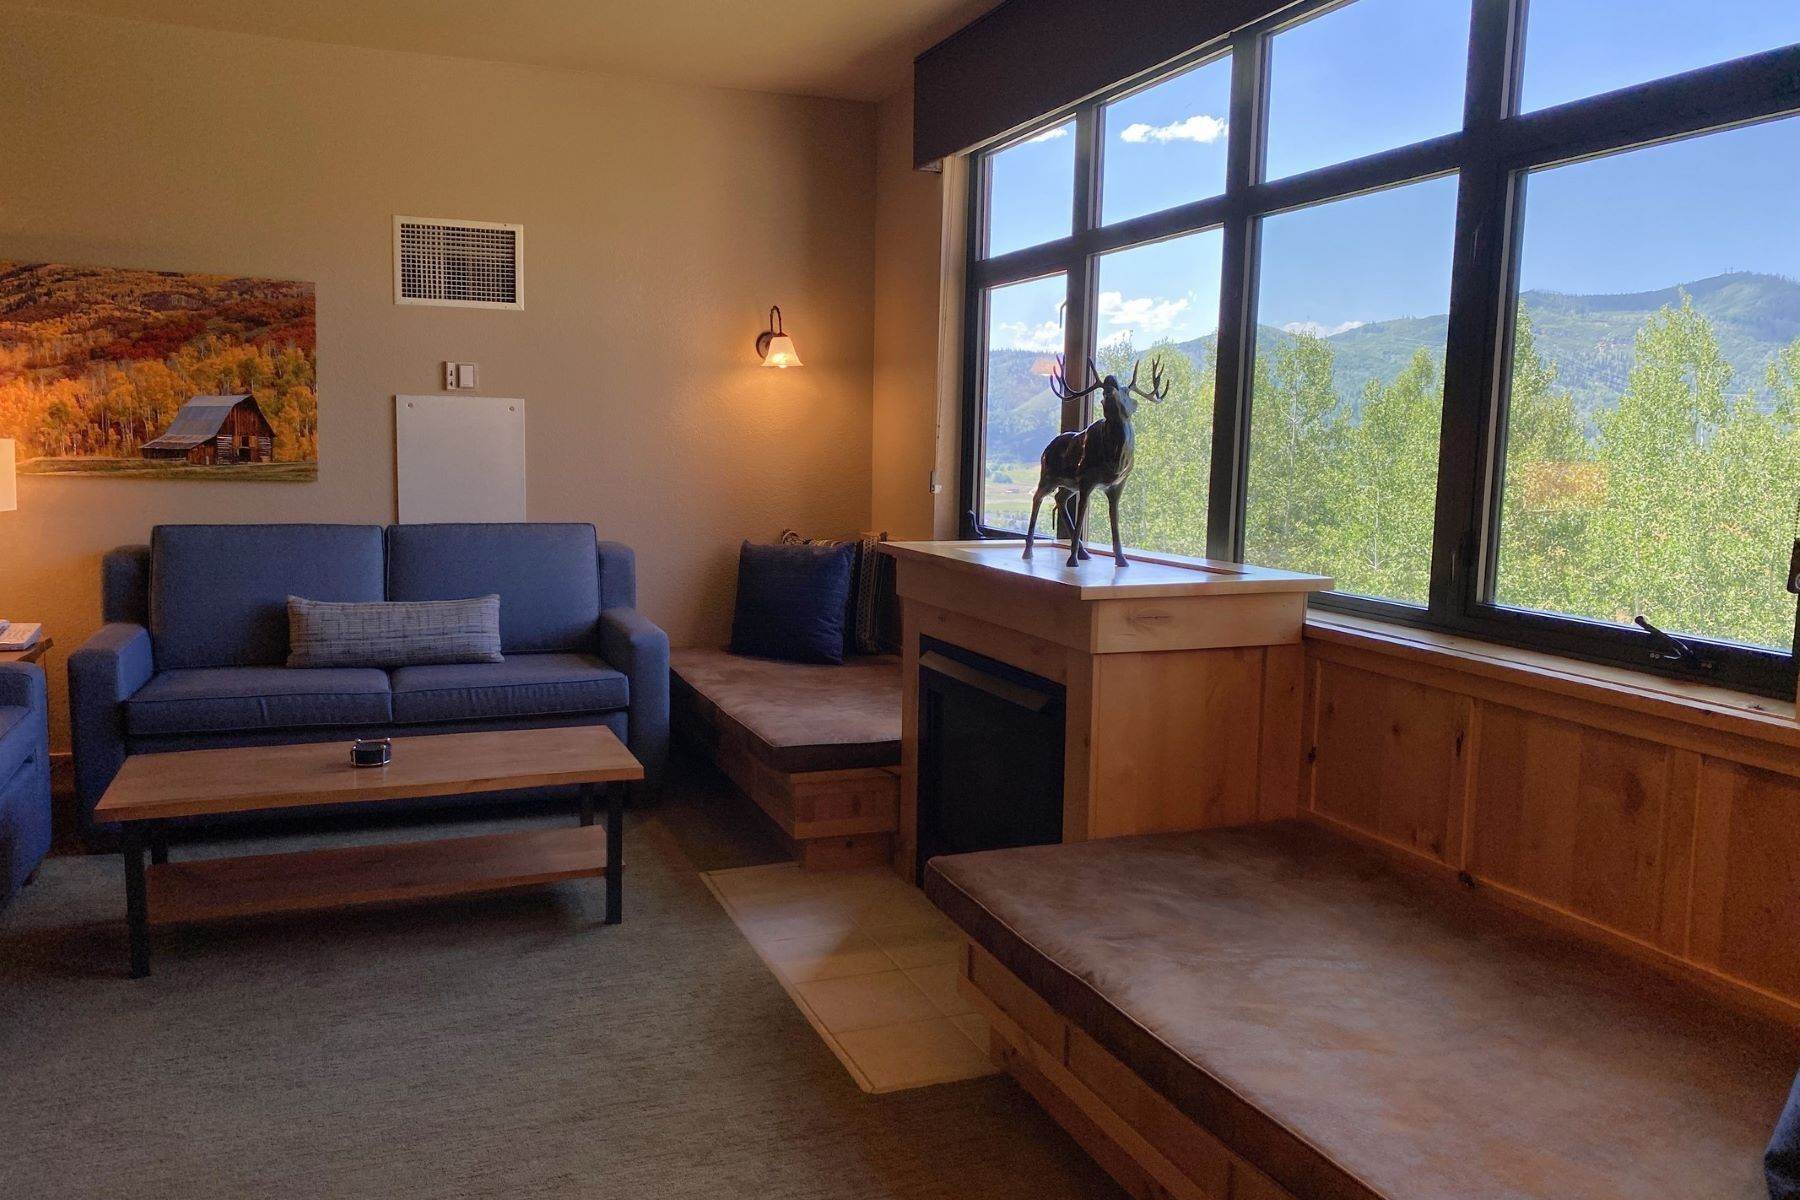 Fractional Ownership Property for Active at 4th Floor End Unit at the Grand 2300 Mt Werner Circle Unit# 469-470 Steamboat Springs, Colorado 80487 United States